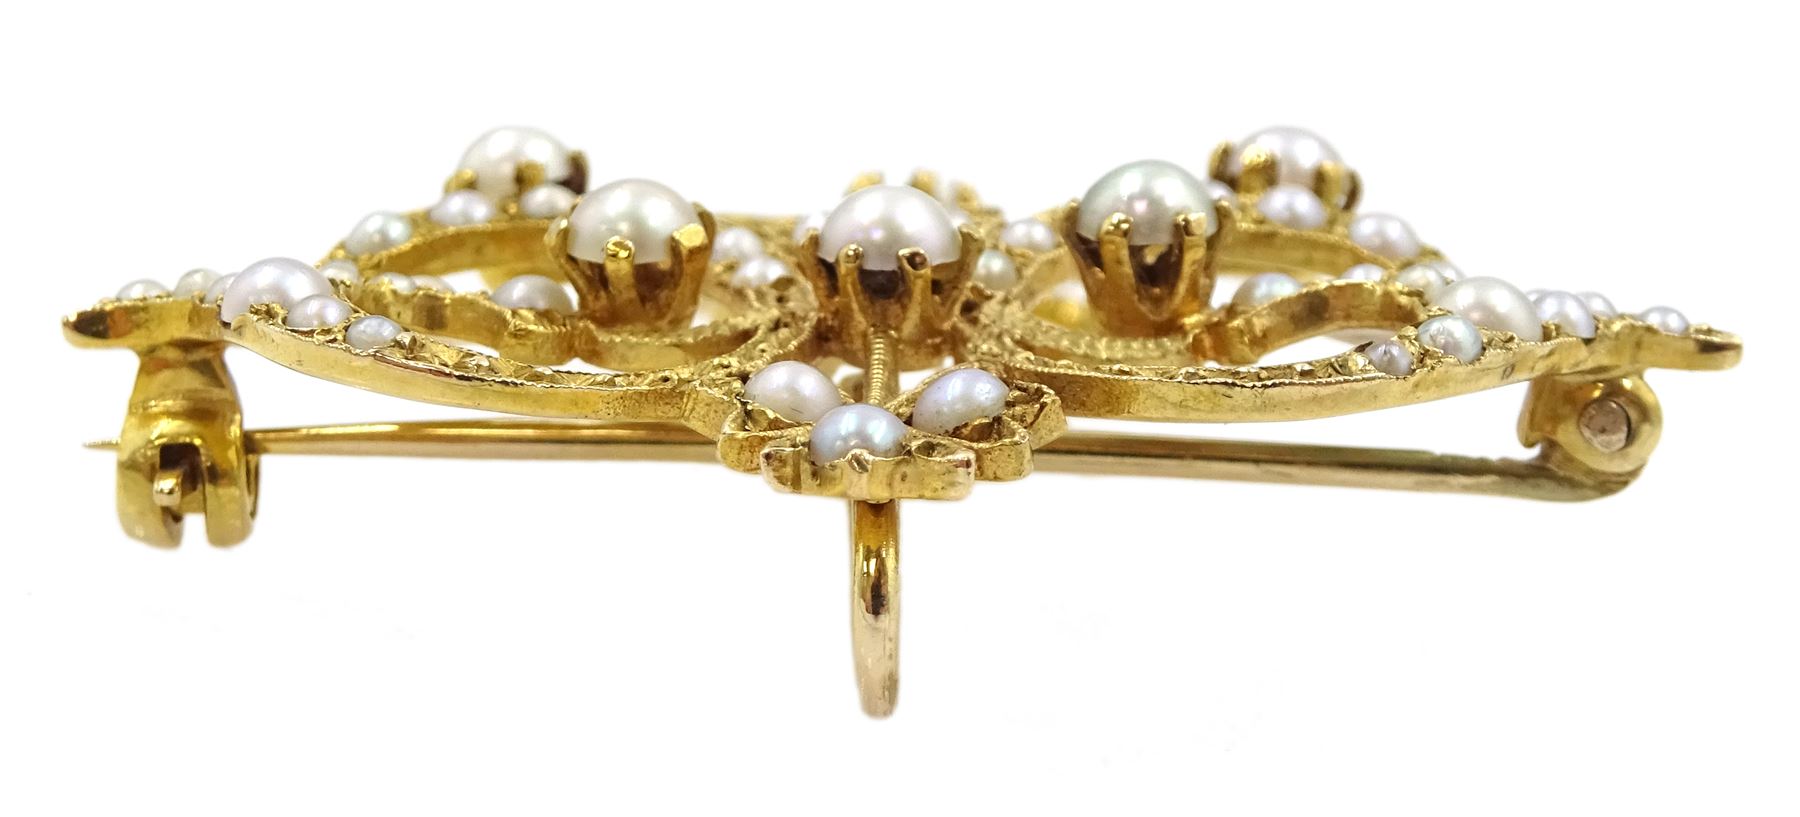 Early 20th century 9ct gold pearl pendant/brooch - Image 2 of 2